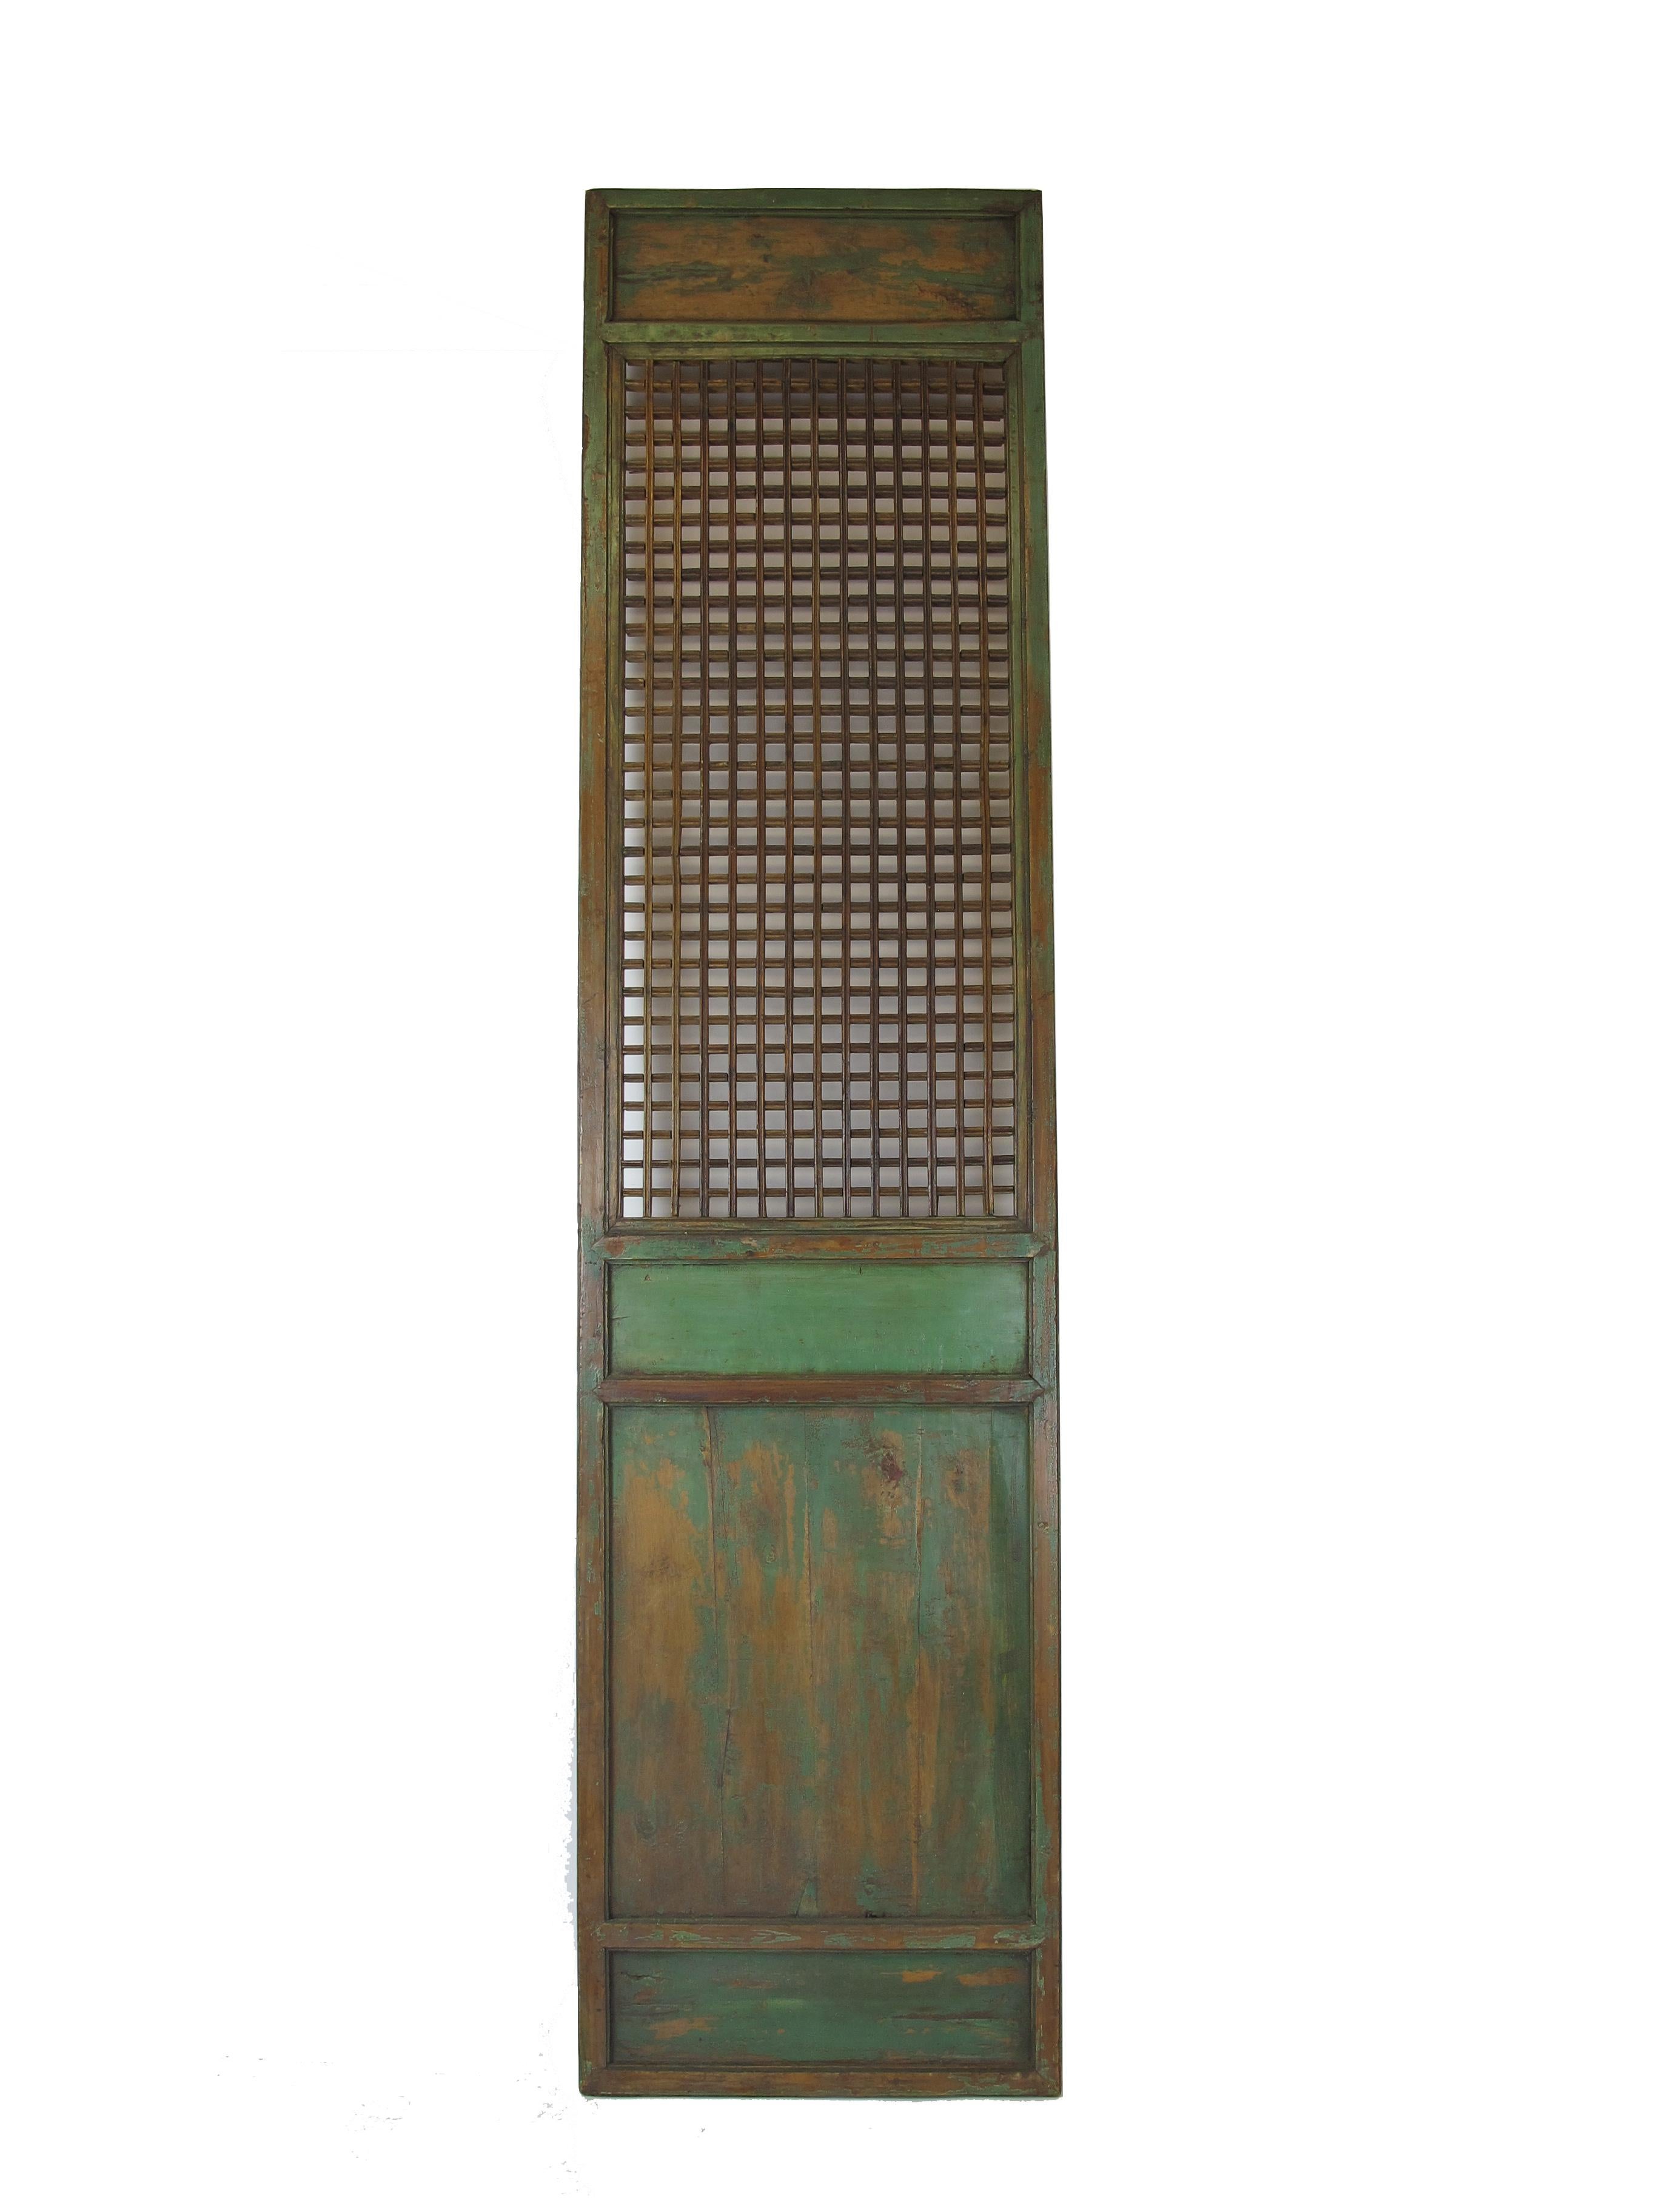 Measuring 28.5 in width and almost 10 feet tall each, this set of six lattice panels over 14 feet in width together can be a stunning room divider, wall art, or screen door to provide sweeping and masculine view in a large room with high ceiling in